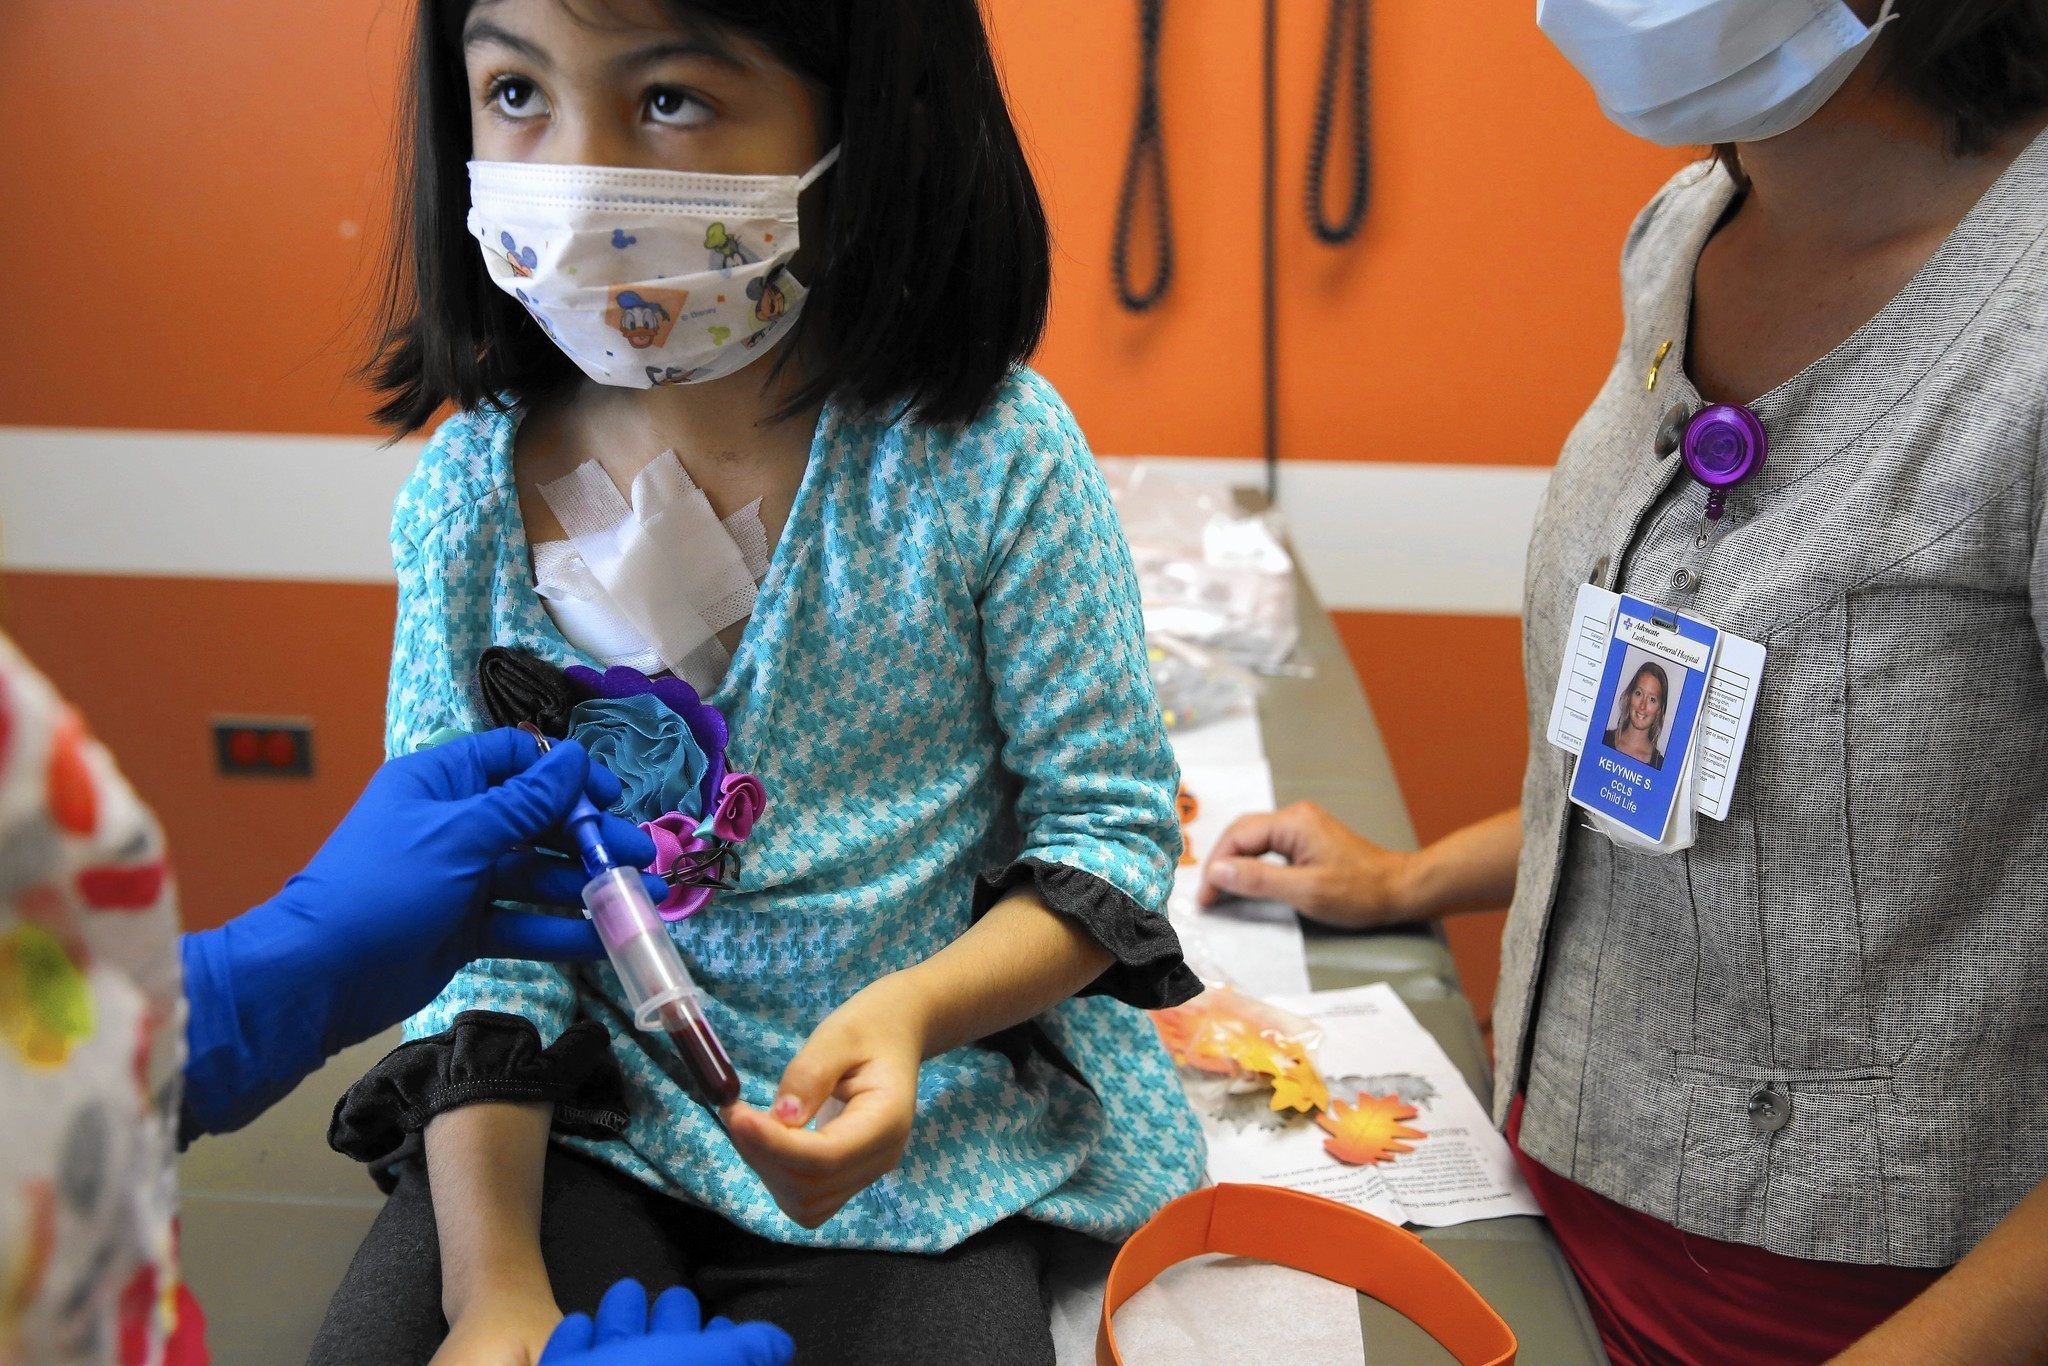 Girl in need of bone marrow highlights shortage of mixed-race donors